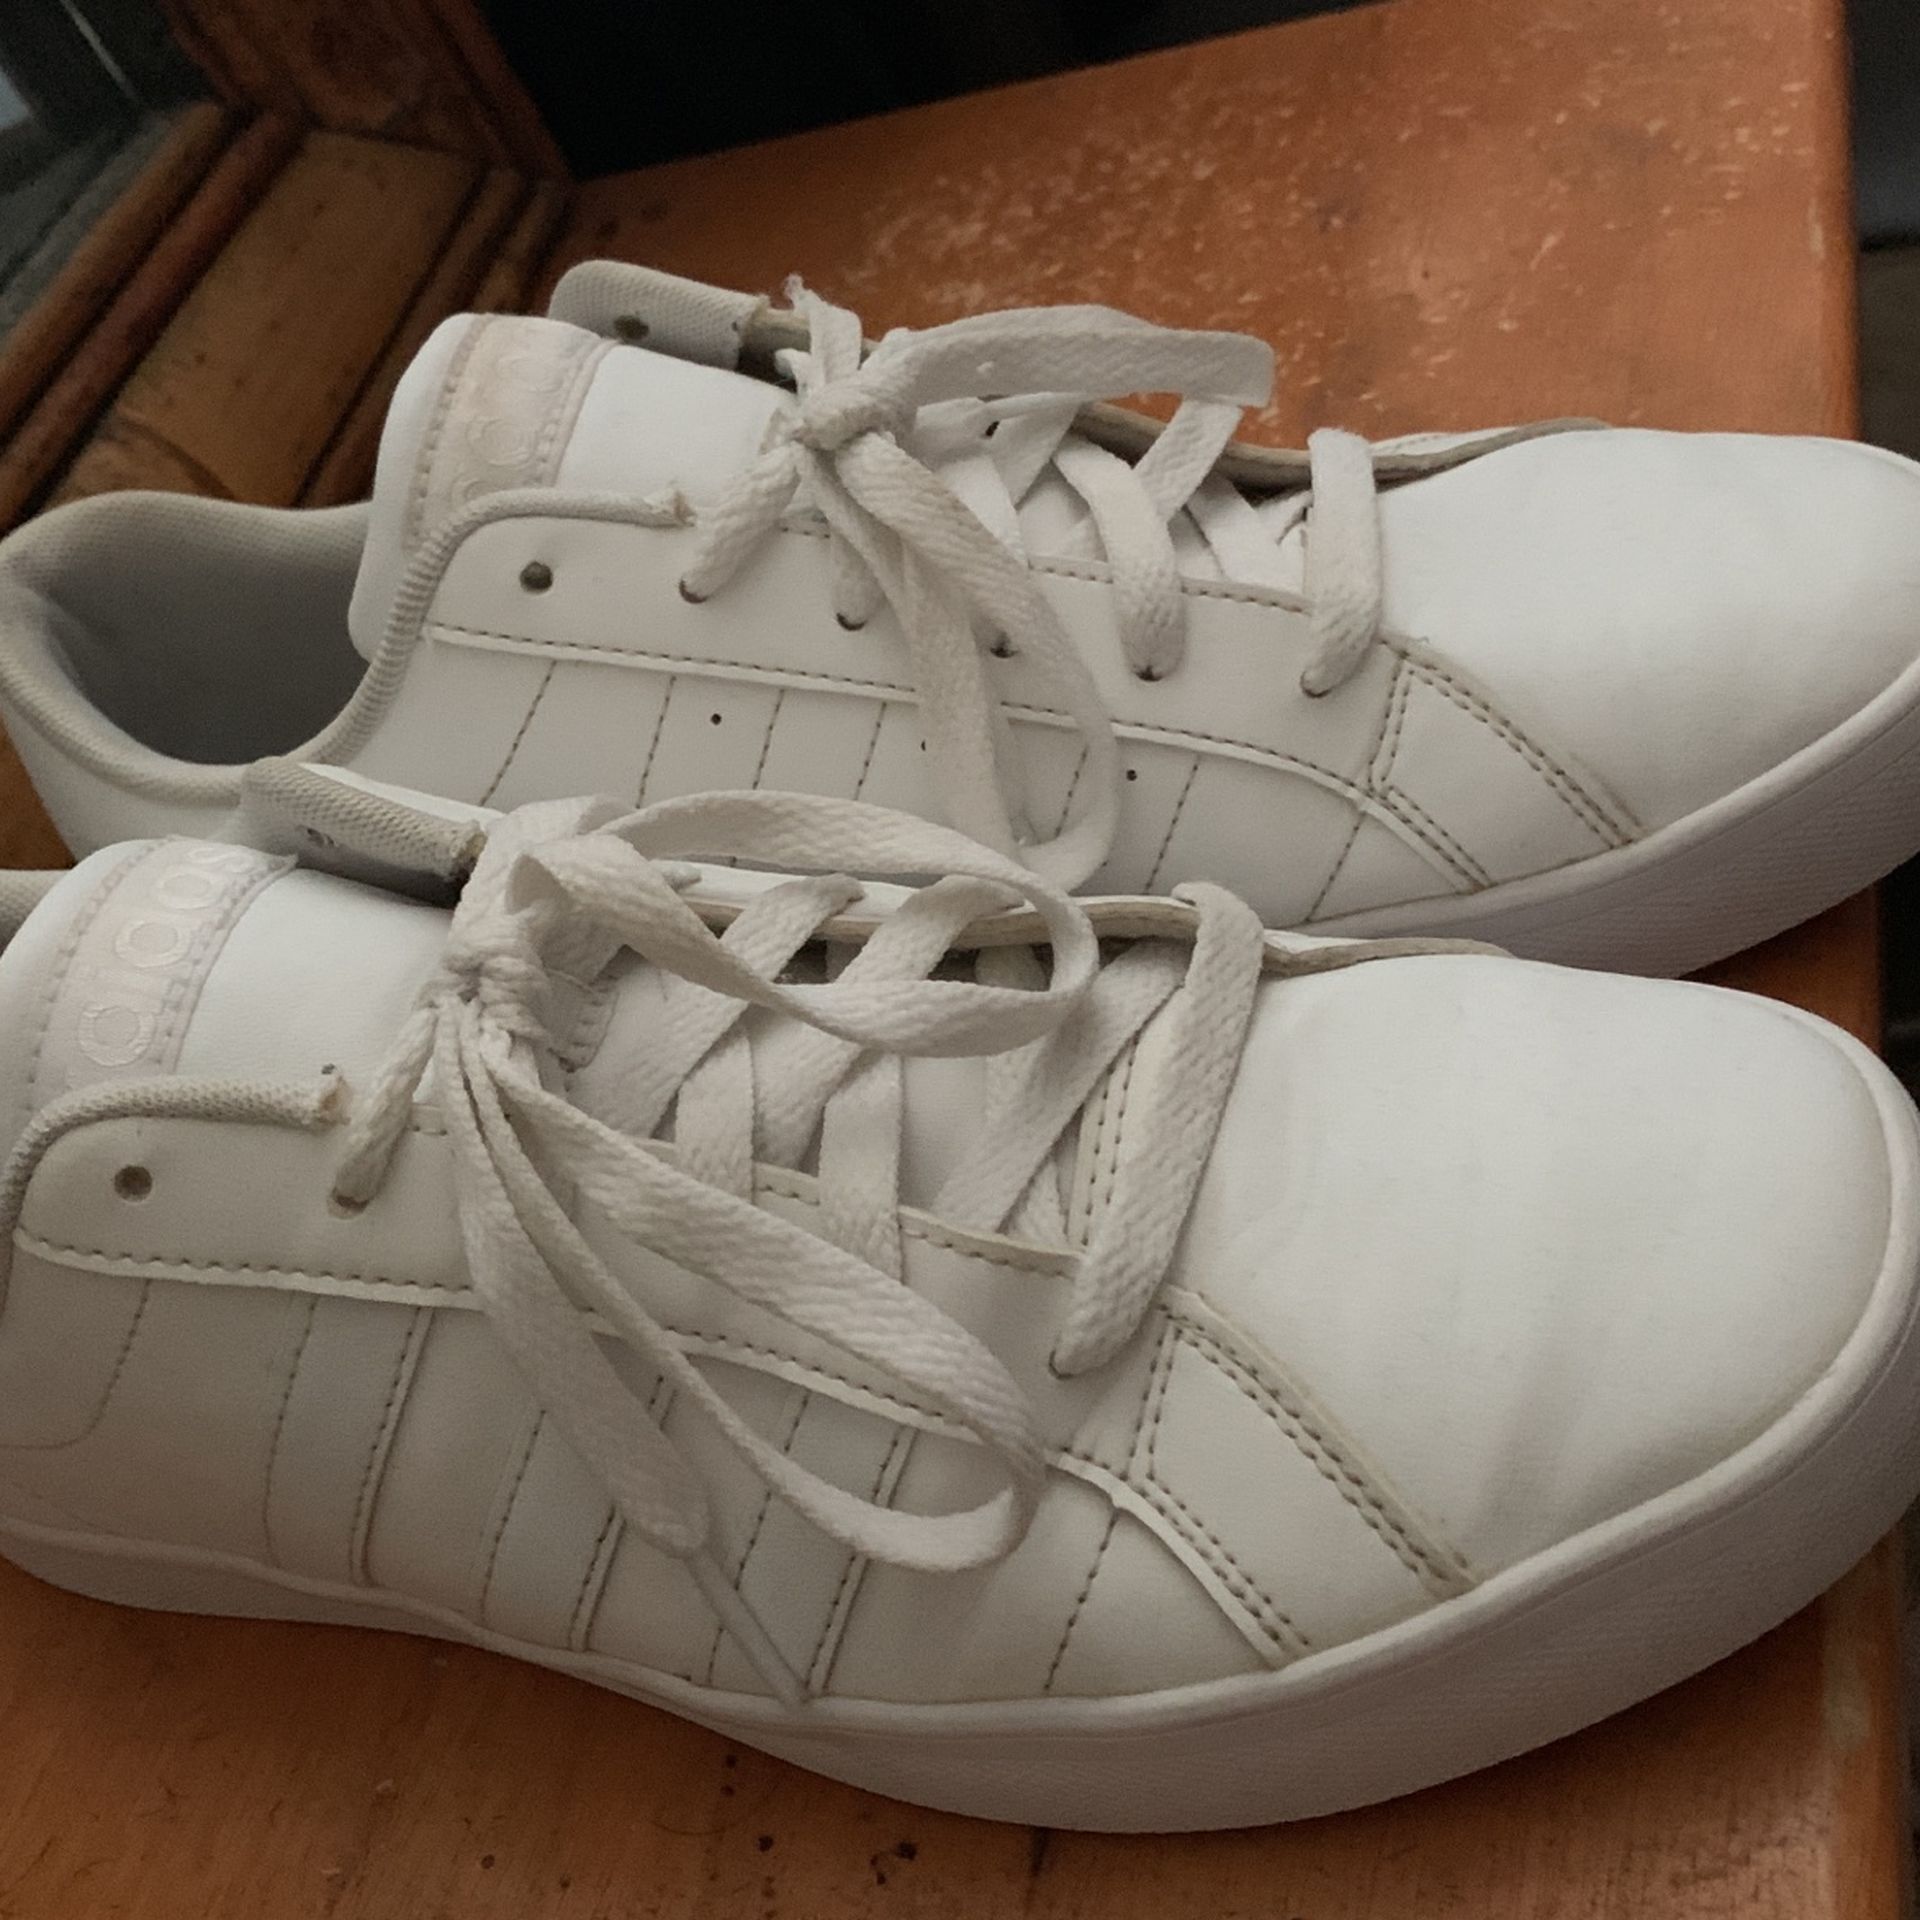 All White Adidas Shoes VERY NICE:)